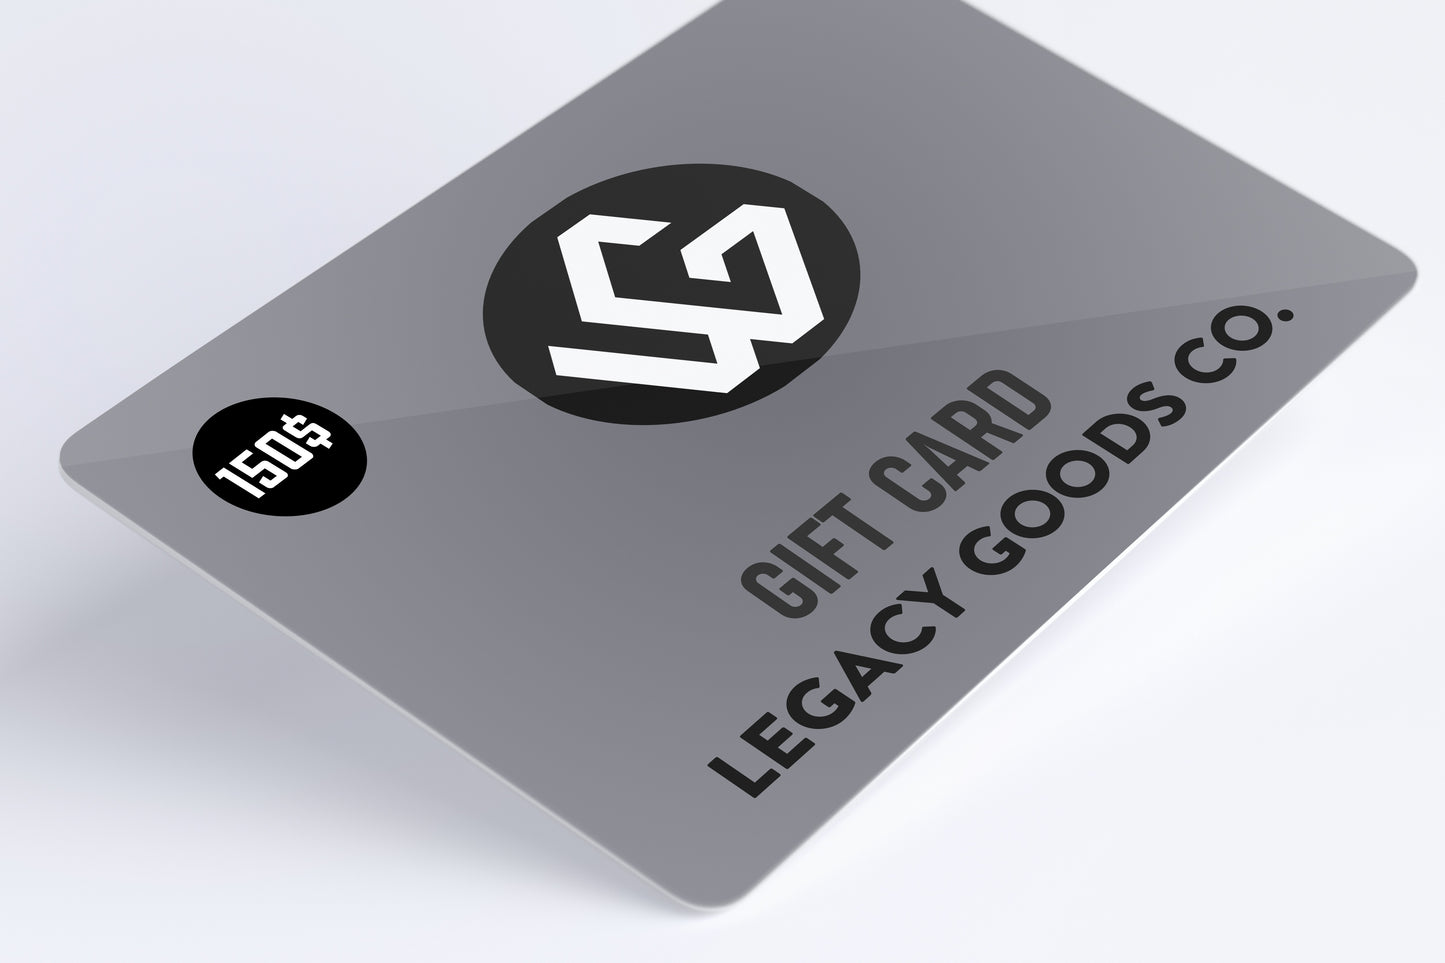 The 150$ Legacy Goods Gift Card!